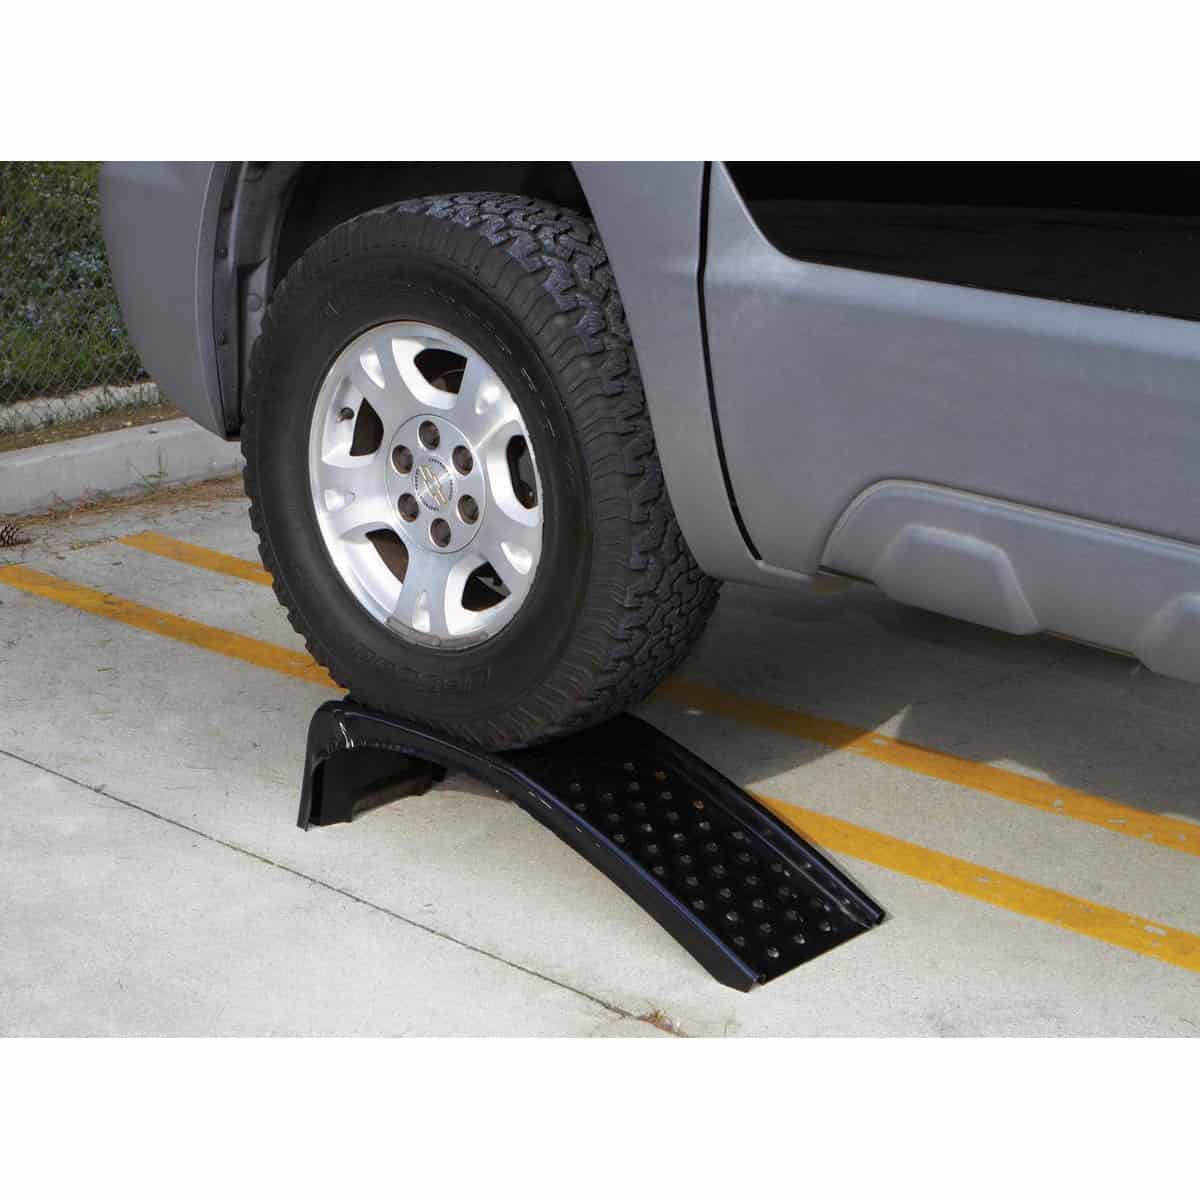 Best Car Ramps (Review and Buying Guide) in 2020